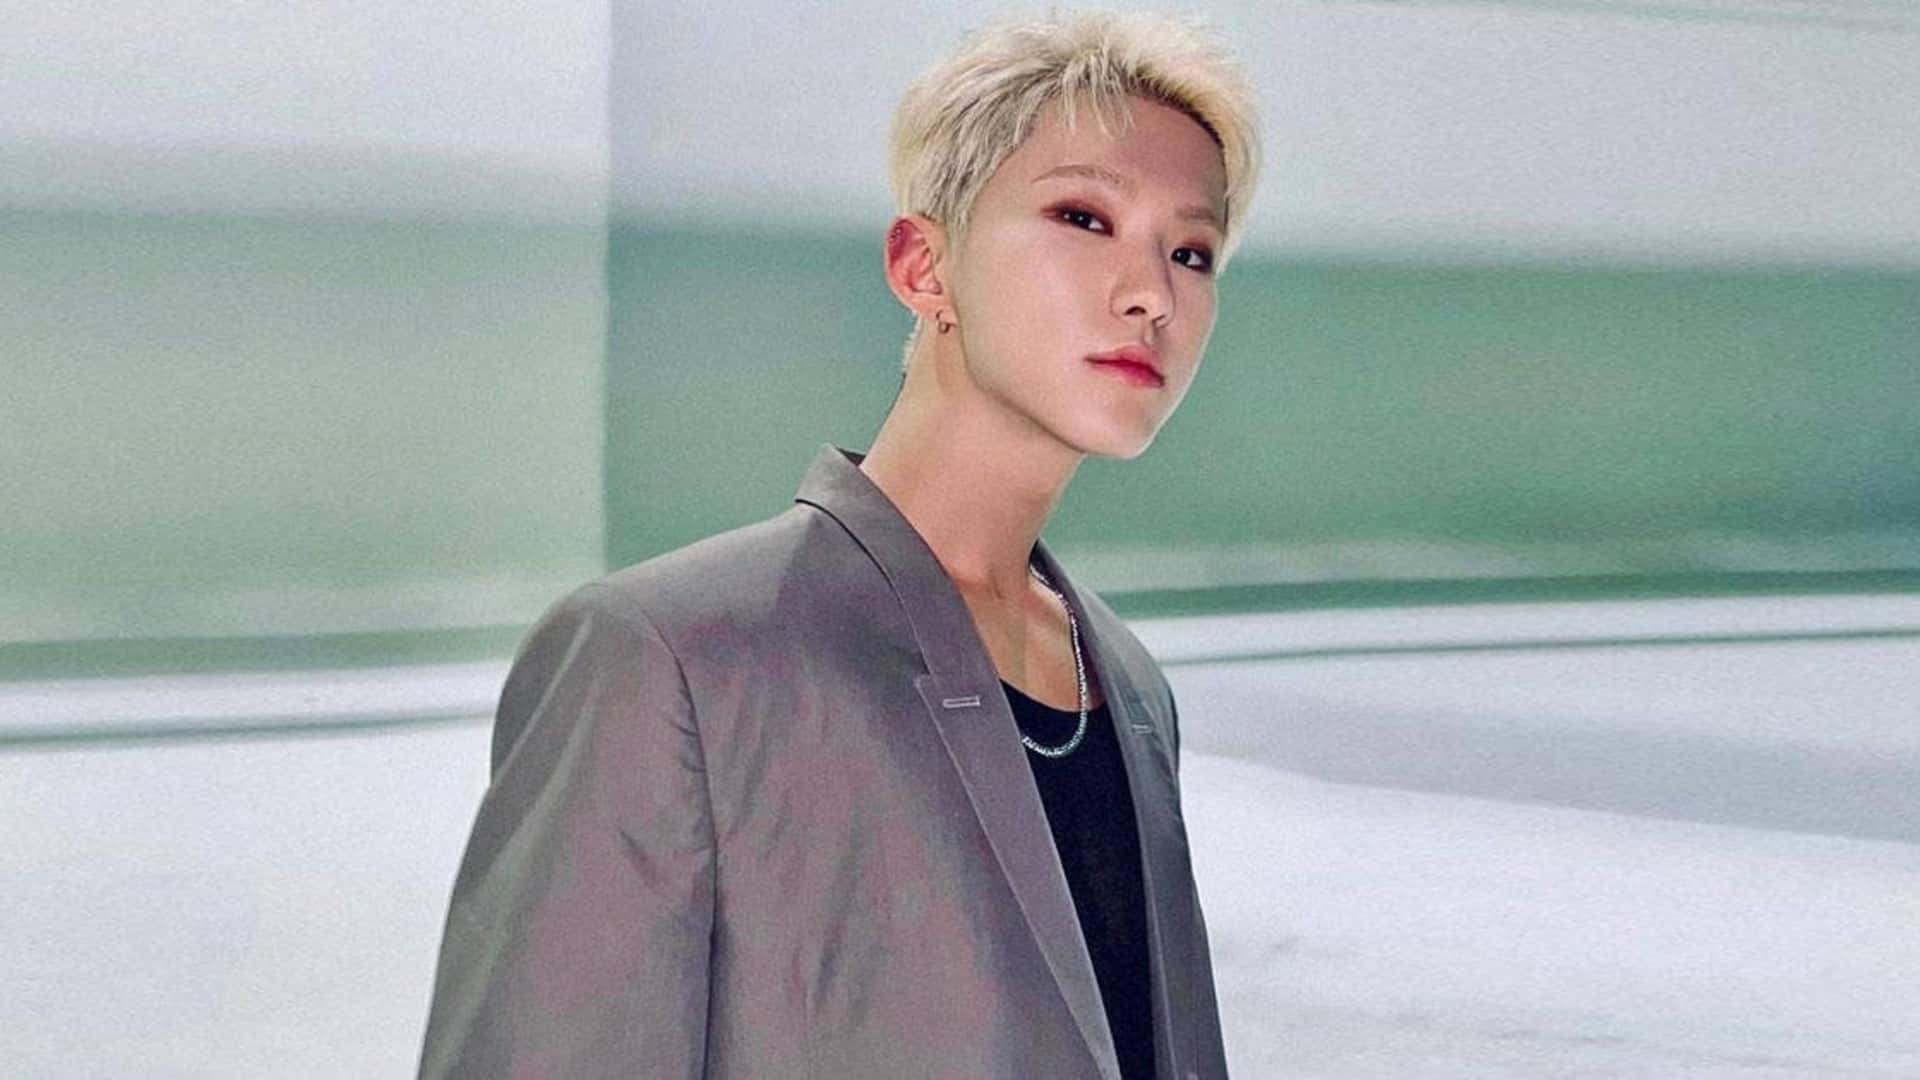 SEVENTEEN's Hoshi treats himself to luxurious apartment: Check price tag